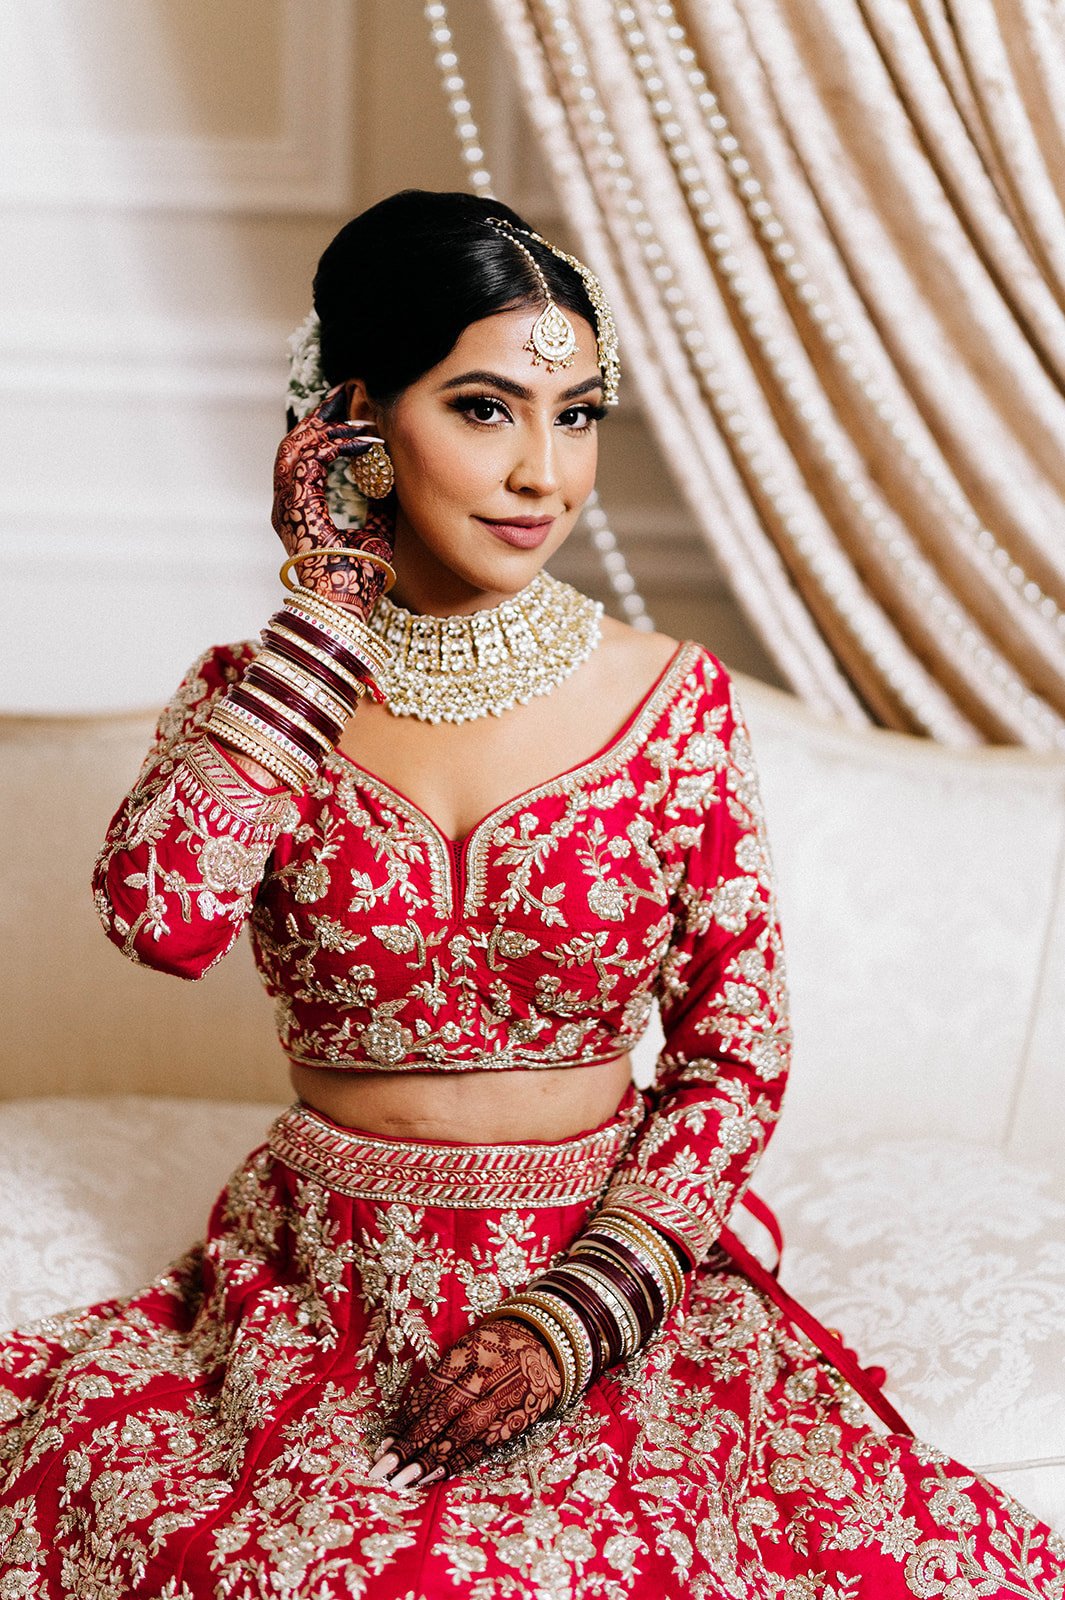 A beautiful indian bride smiles as she adjusts her hair as she gets ready for her wedding.